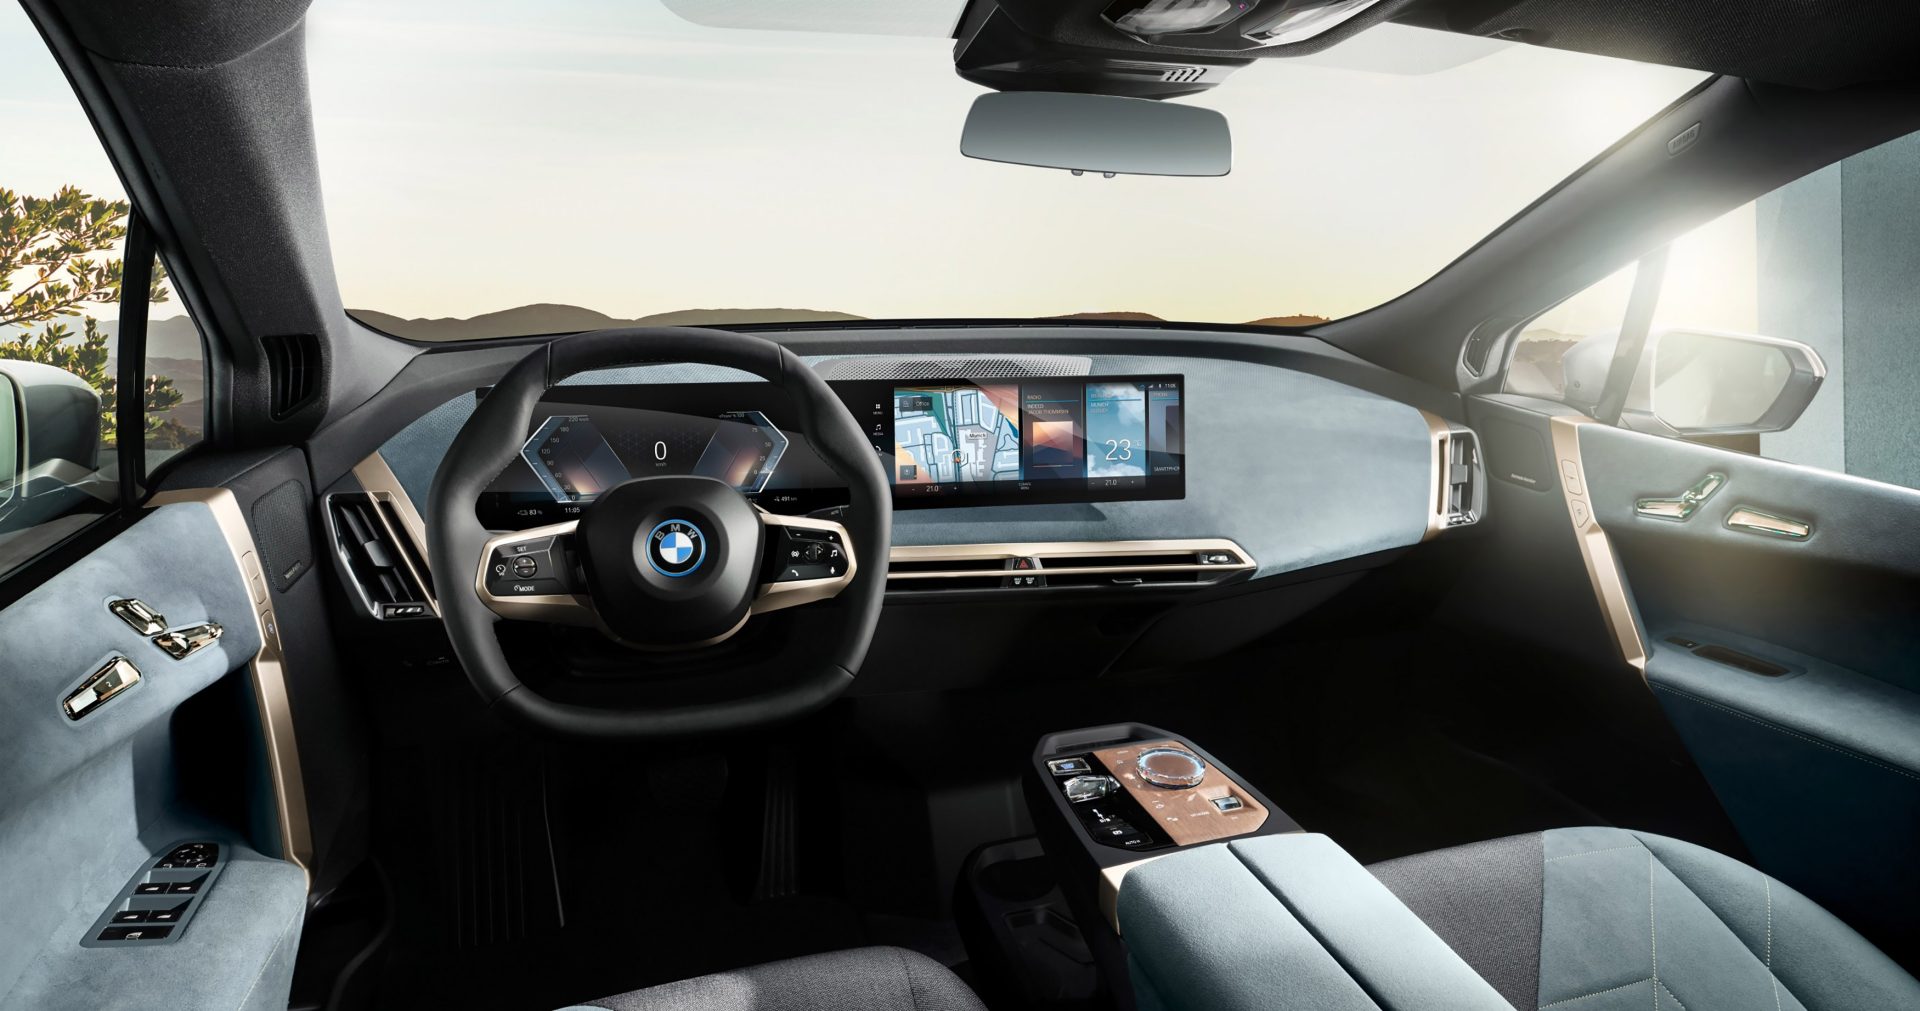 Moving into the future: next-generation BMW iDrive in the BMW iX.